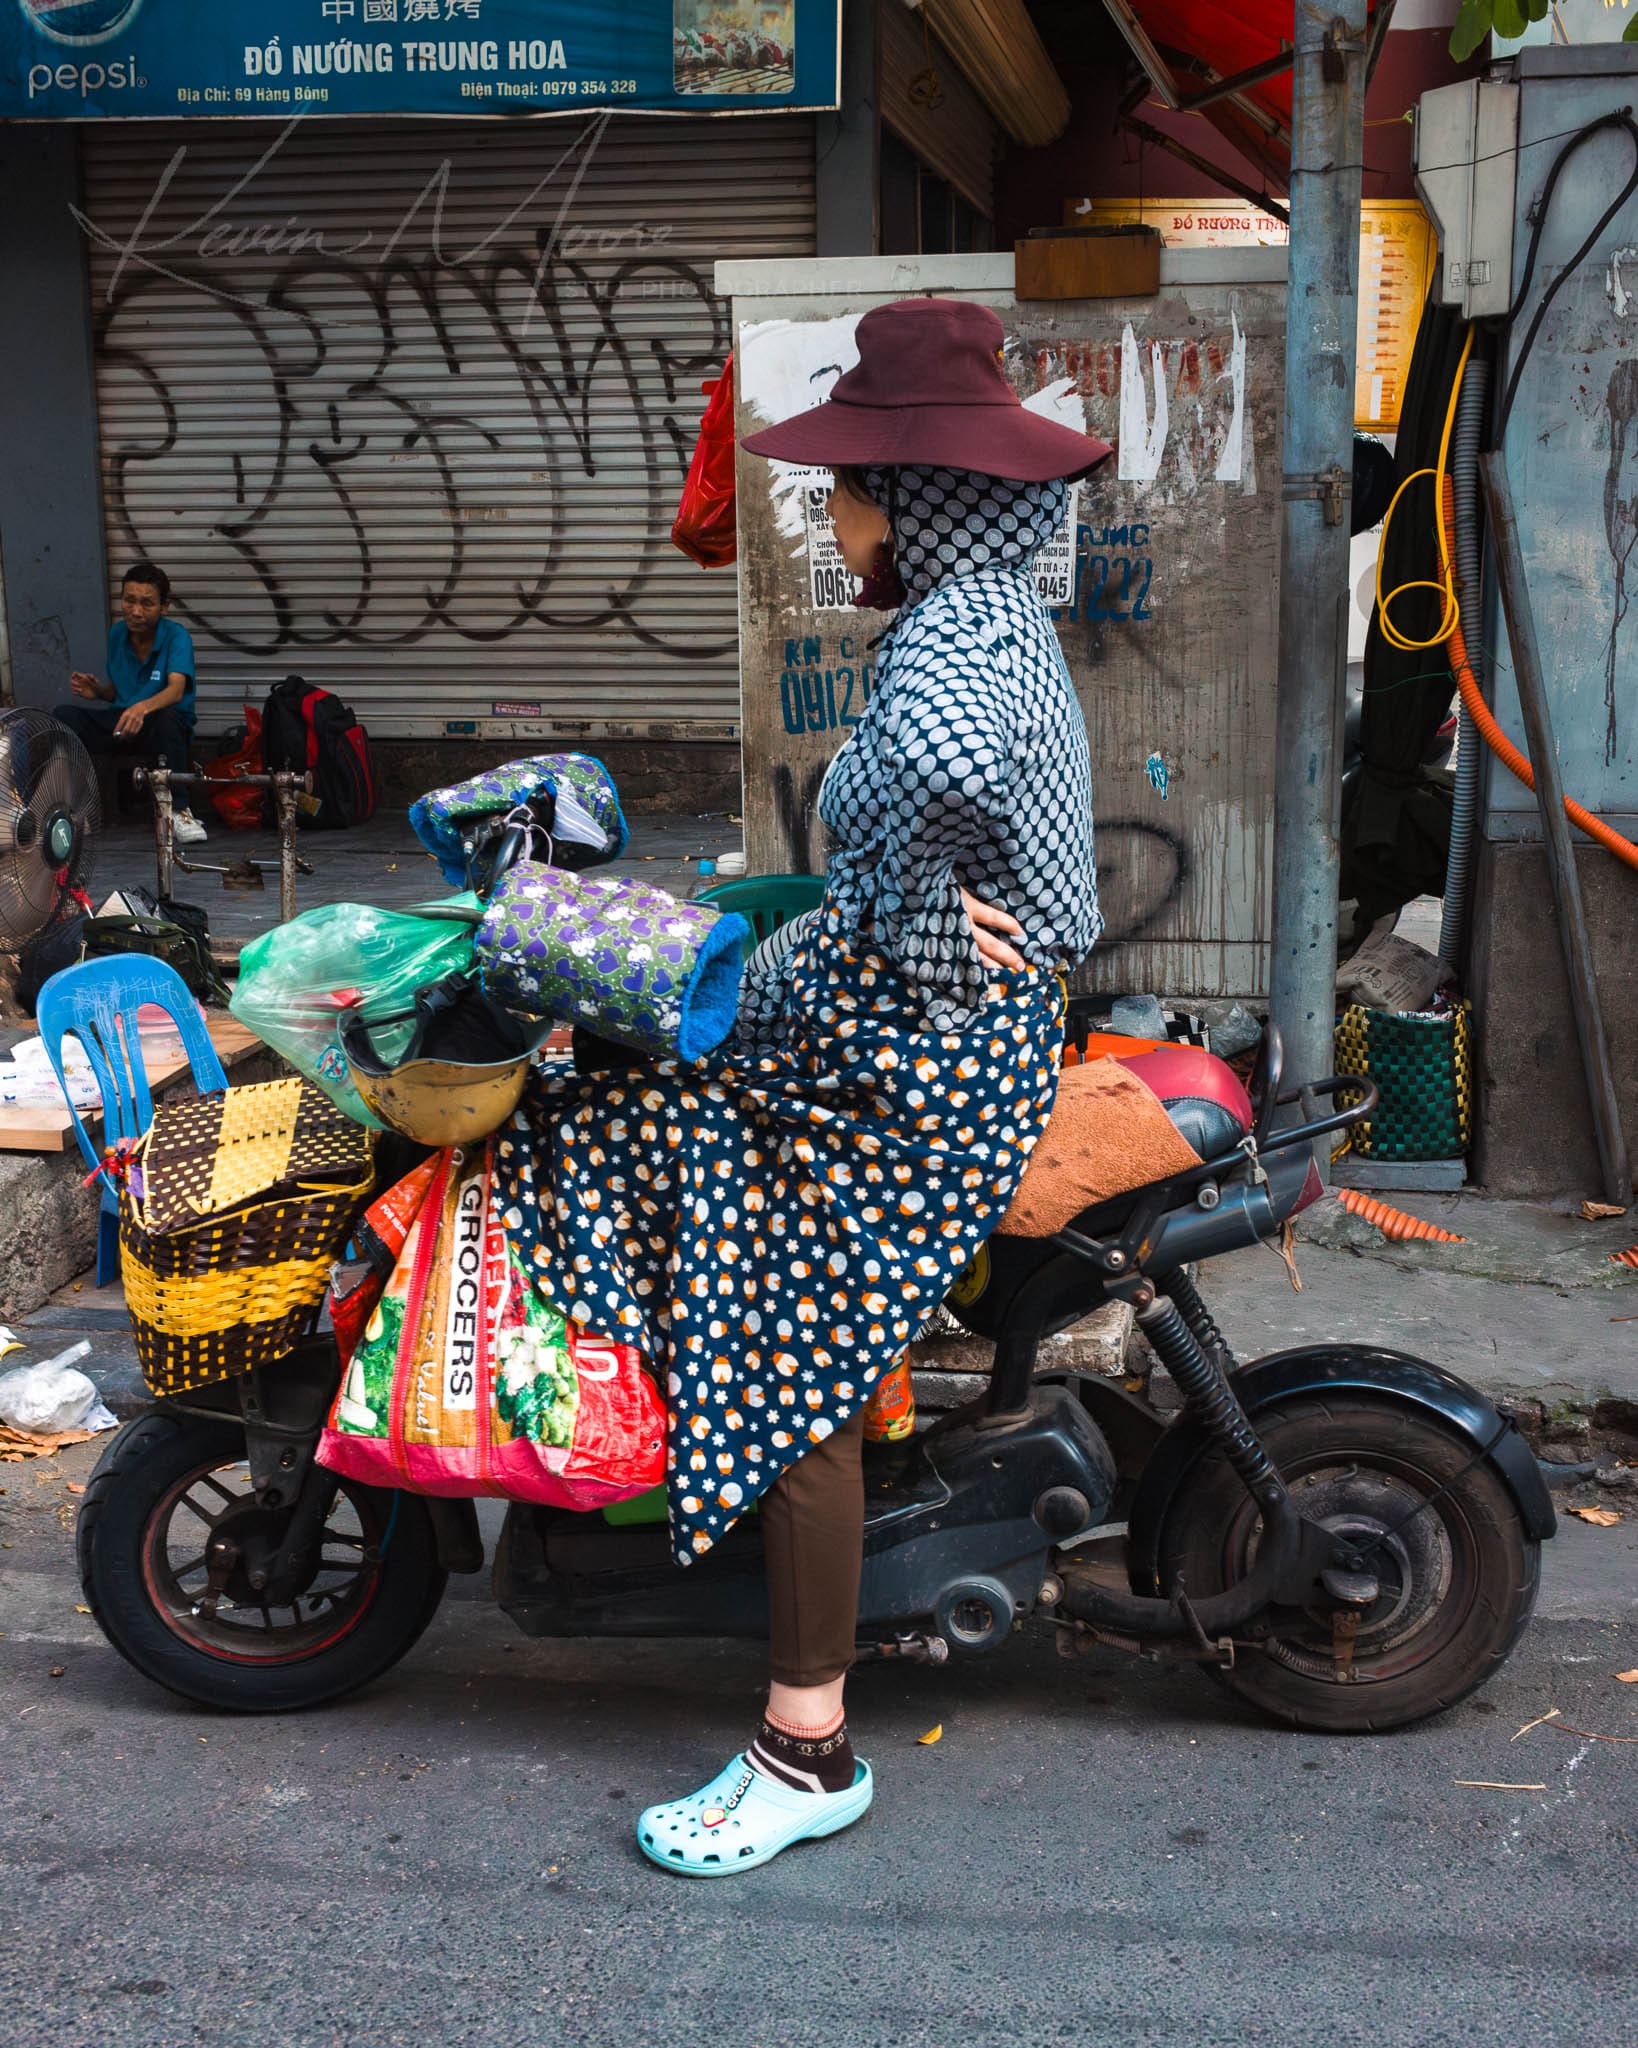 Woman transporting goods on a scooter in a vibrant urban Hanoi setting.